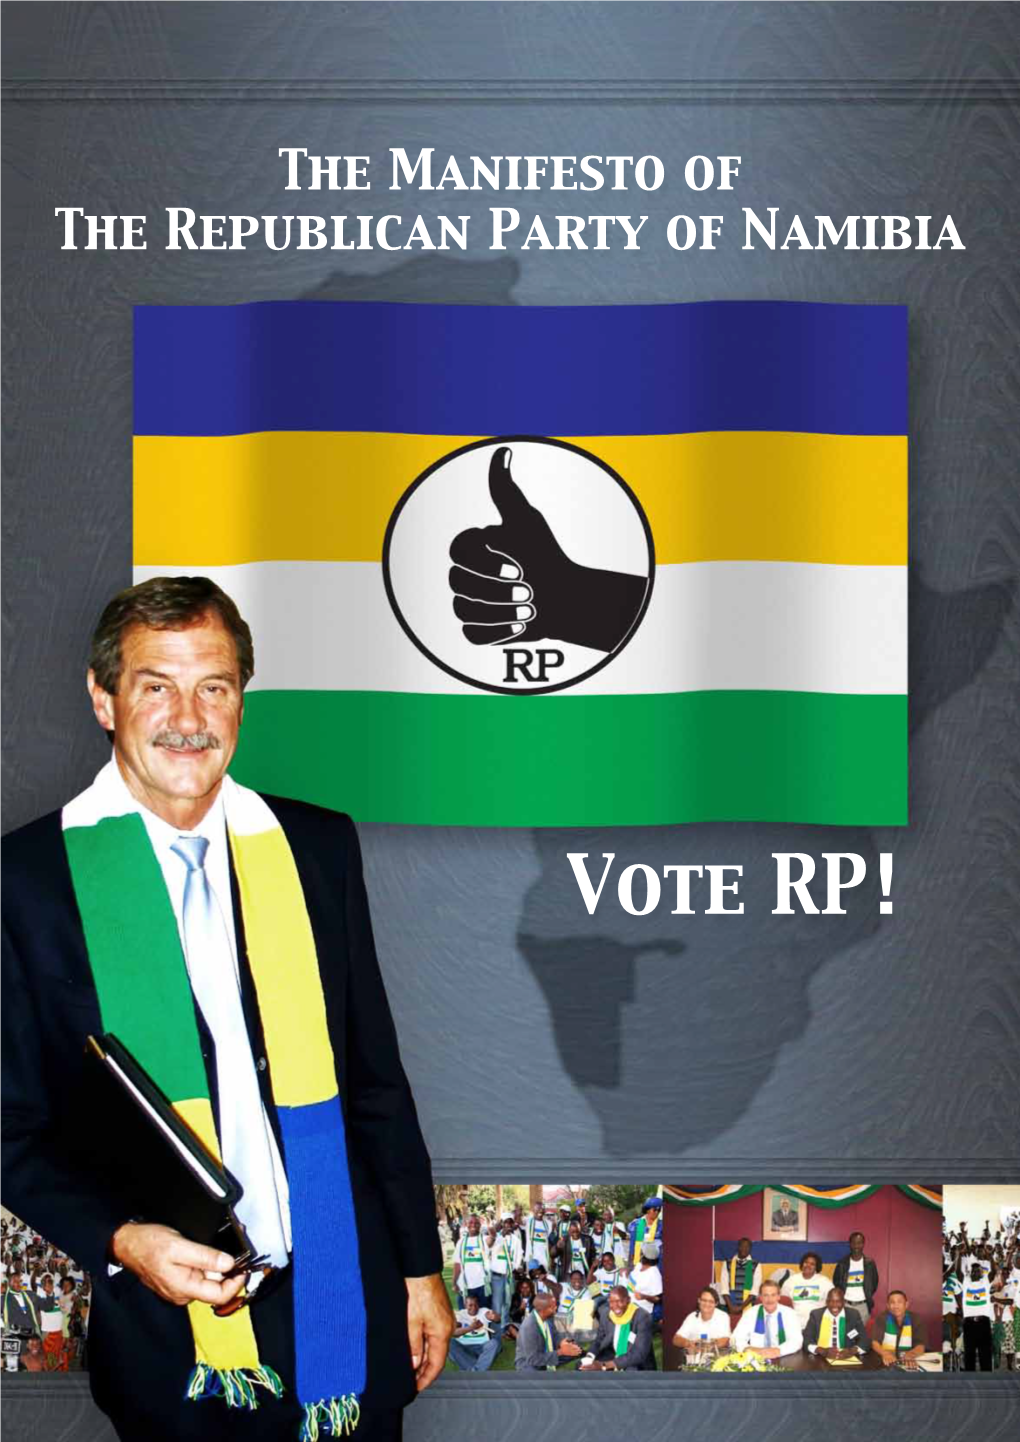 Manifesto of the Republican Party of Namibia